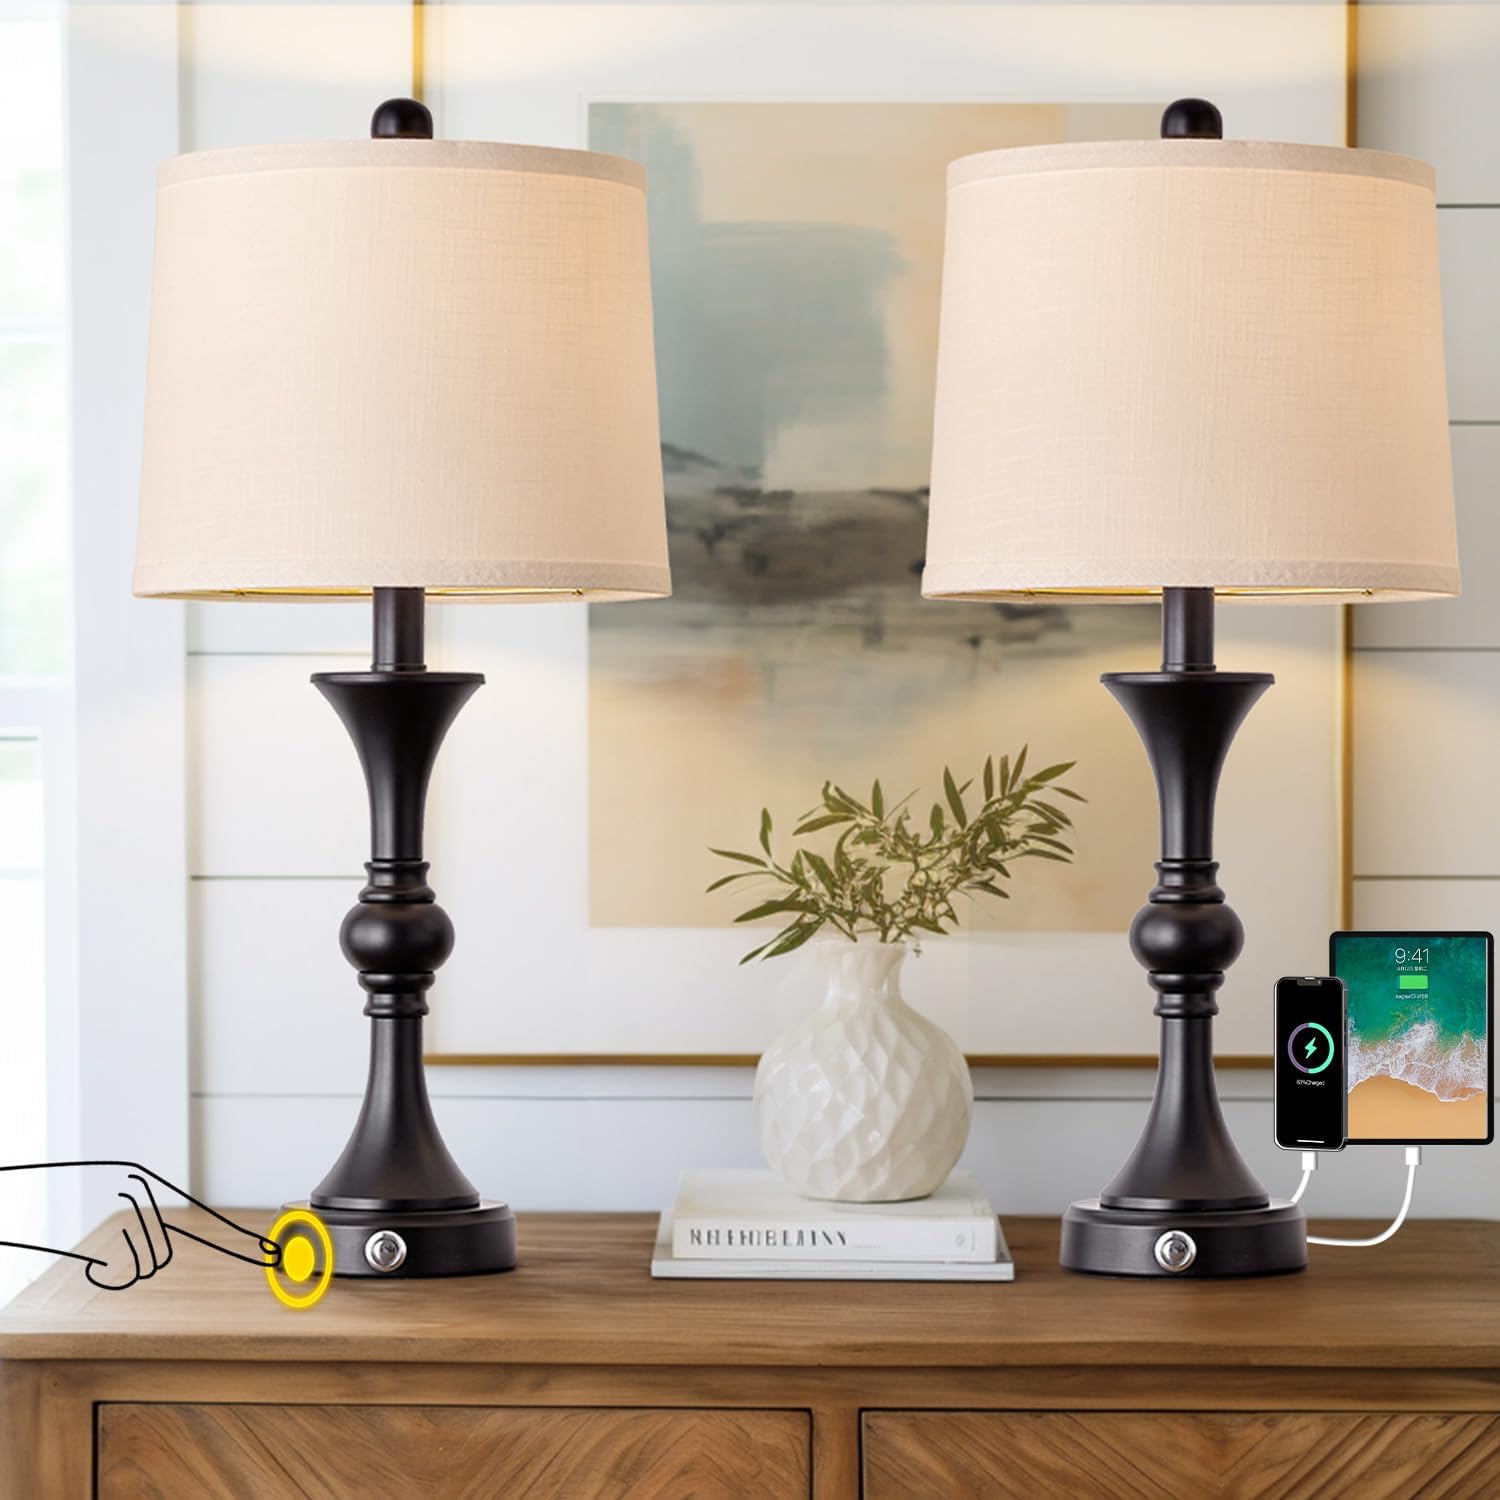 I was hesitant to buy these since assembly was required but that went very nicely. They were placed on the bedside tables and look great.The amount of light is perfect for a bedroom. Would definitely recommend these lamps.